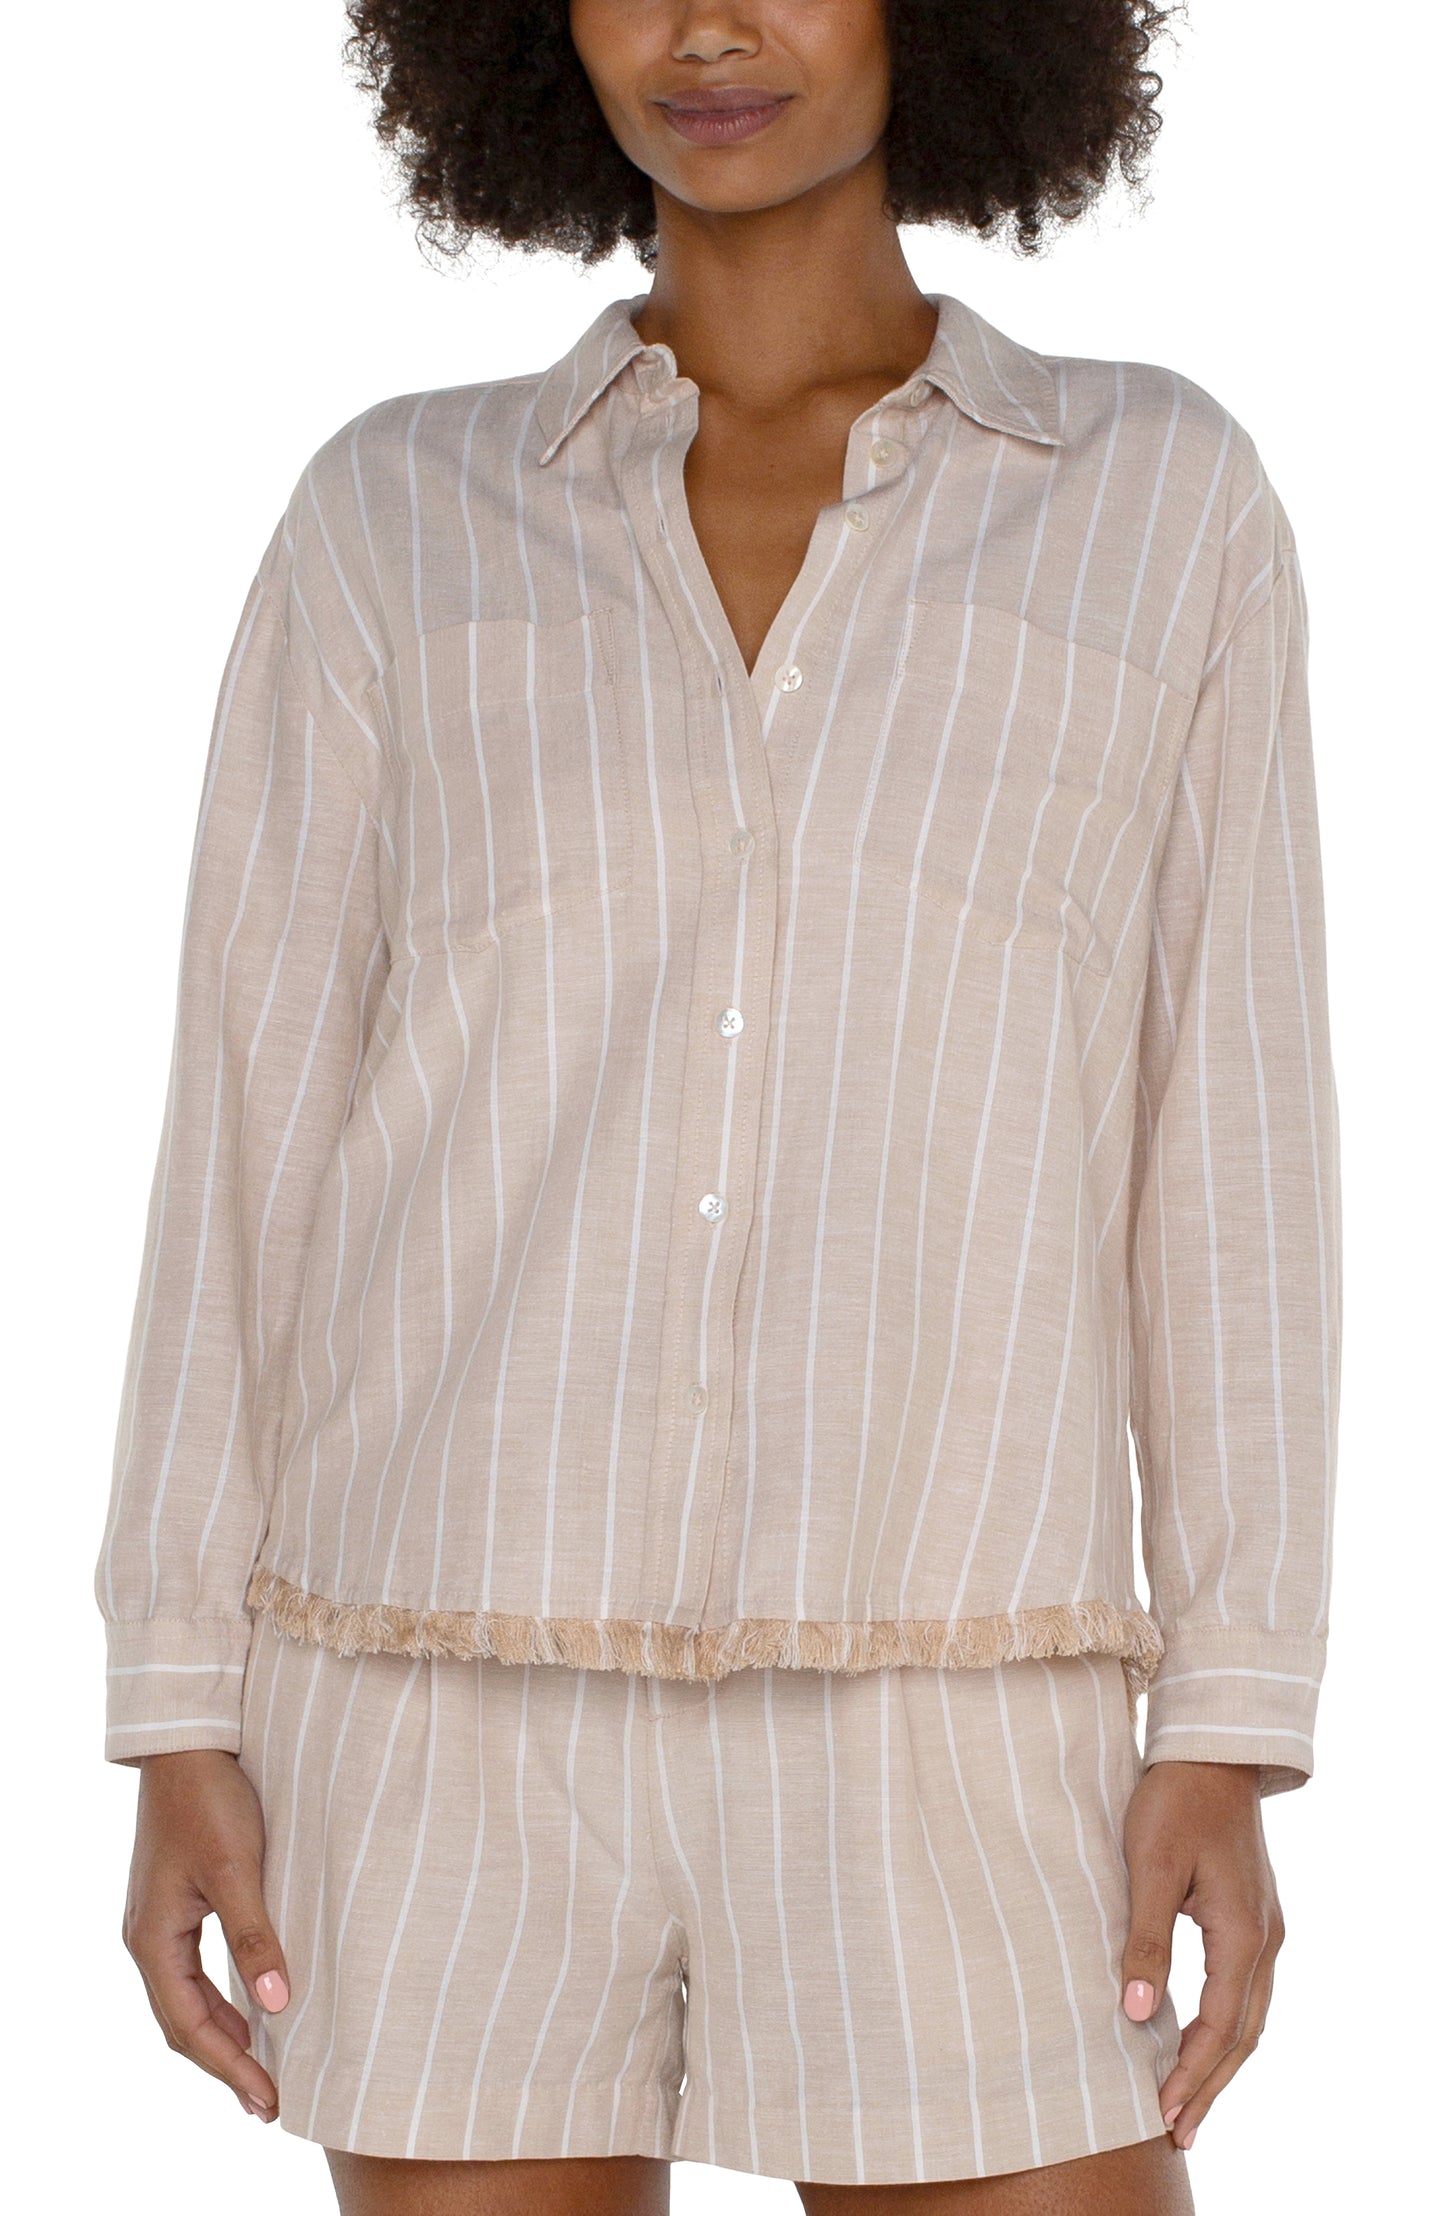 Liverpool Cropped Button Front Shirt with Fray (Tan with Stripe)